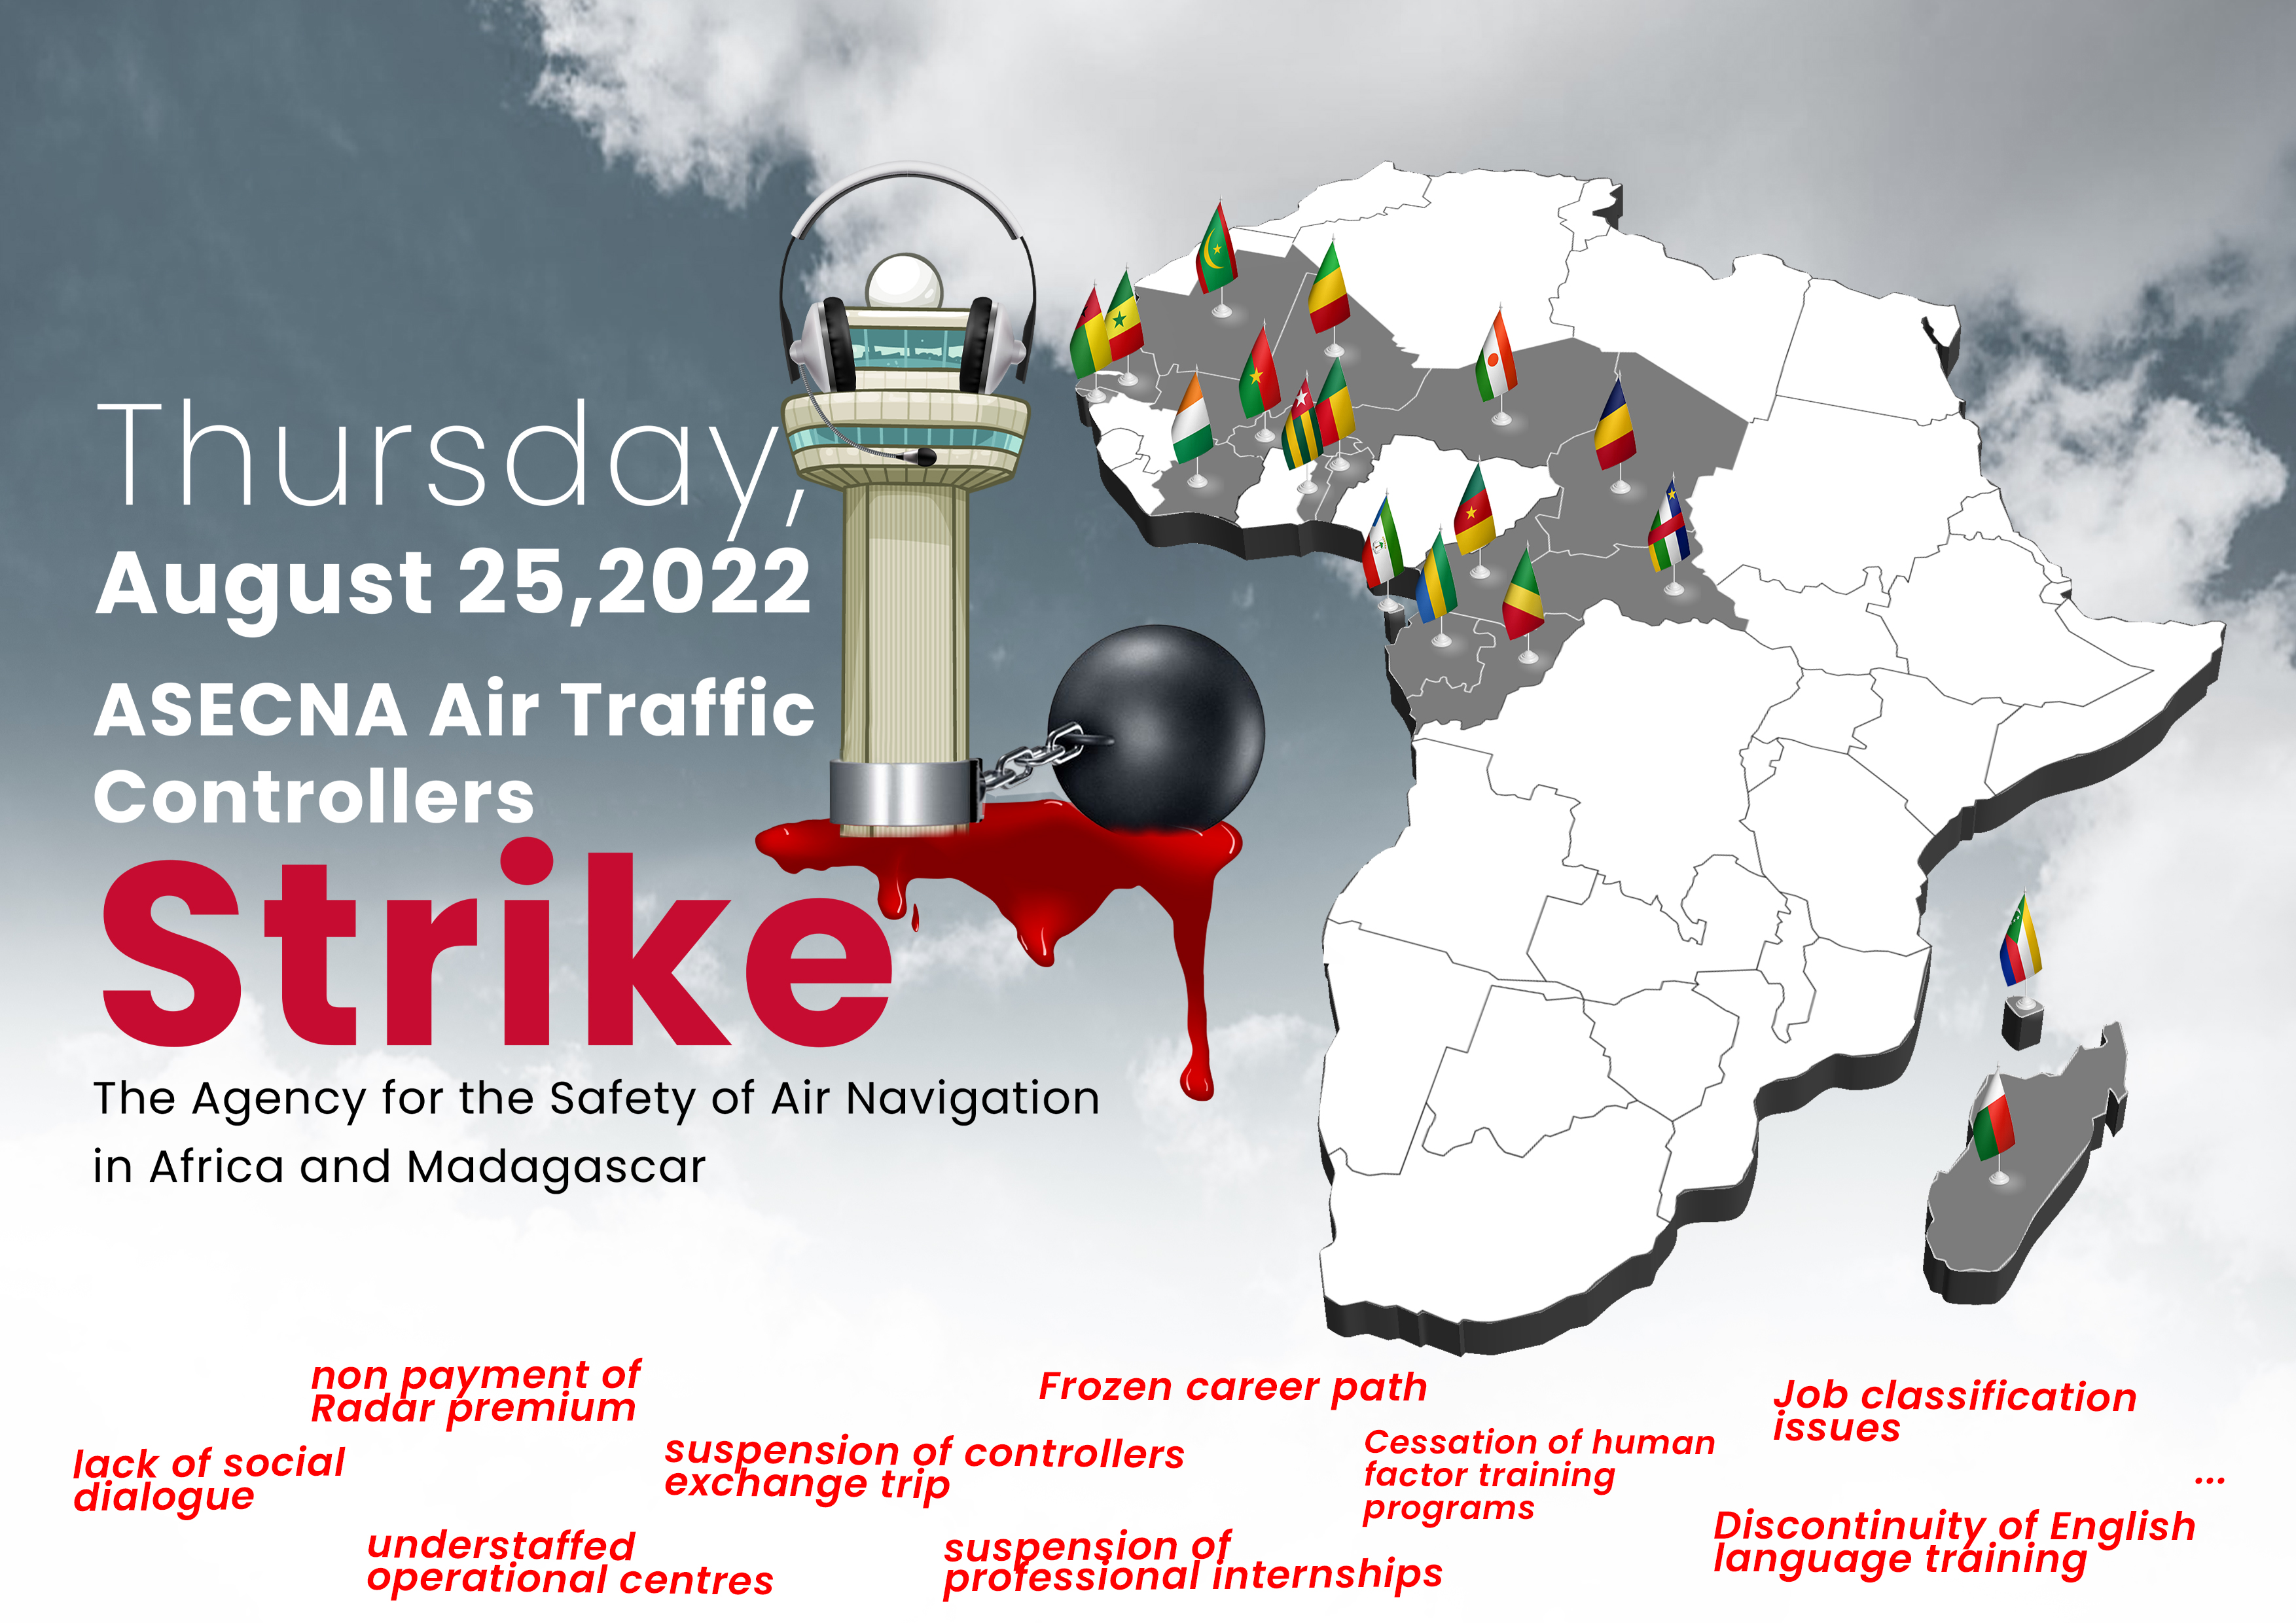 Air traffic controllers in Africa and Madagascar set to strike from 25 – 27 August